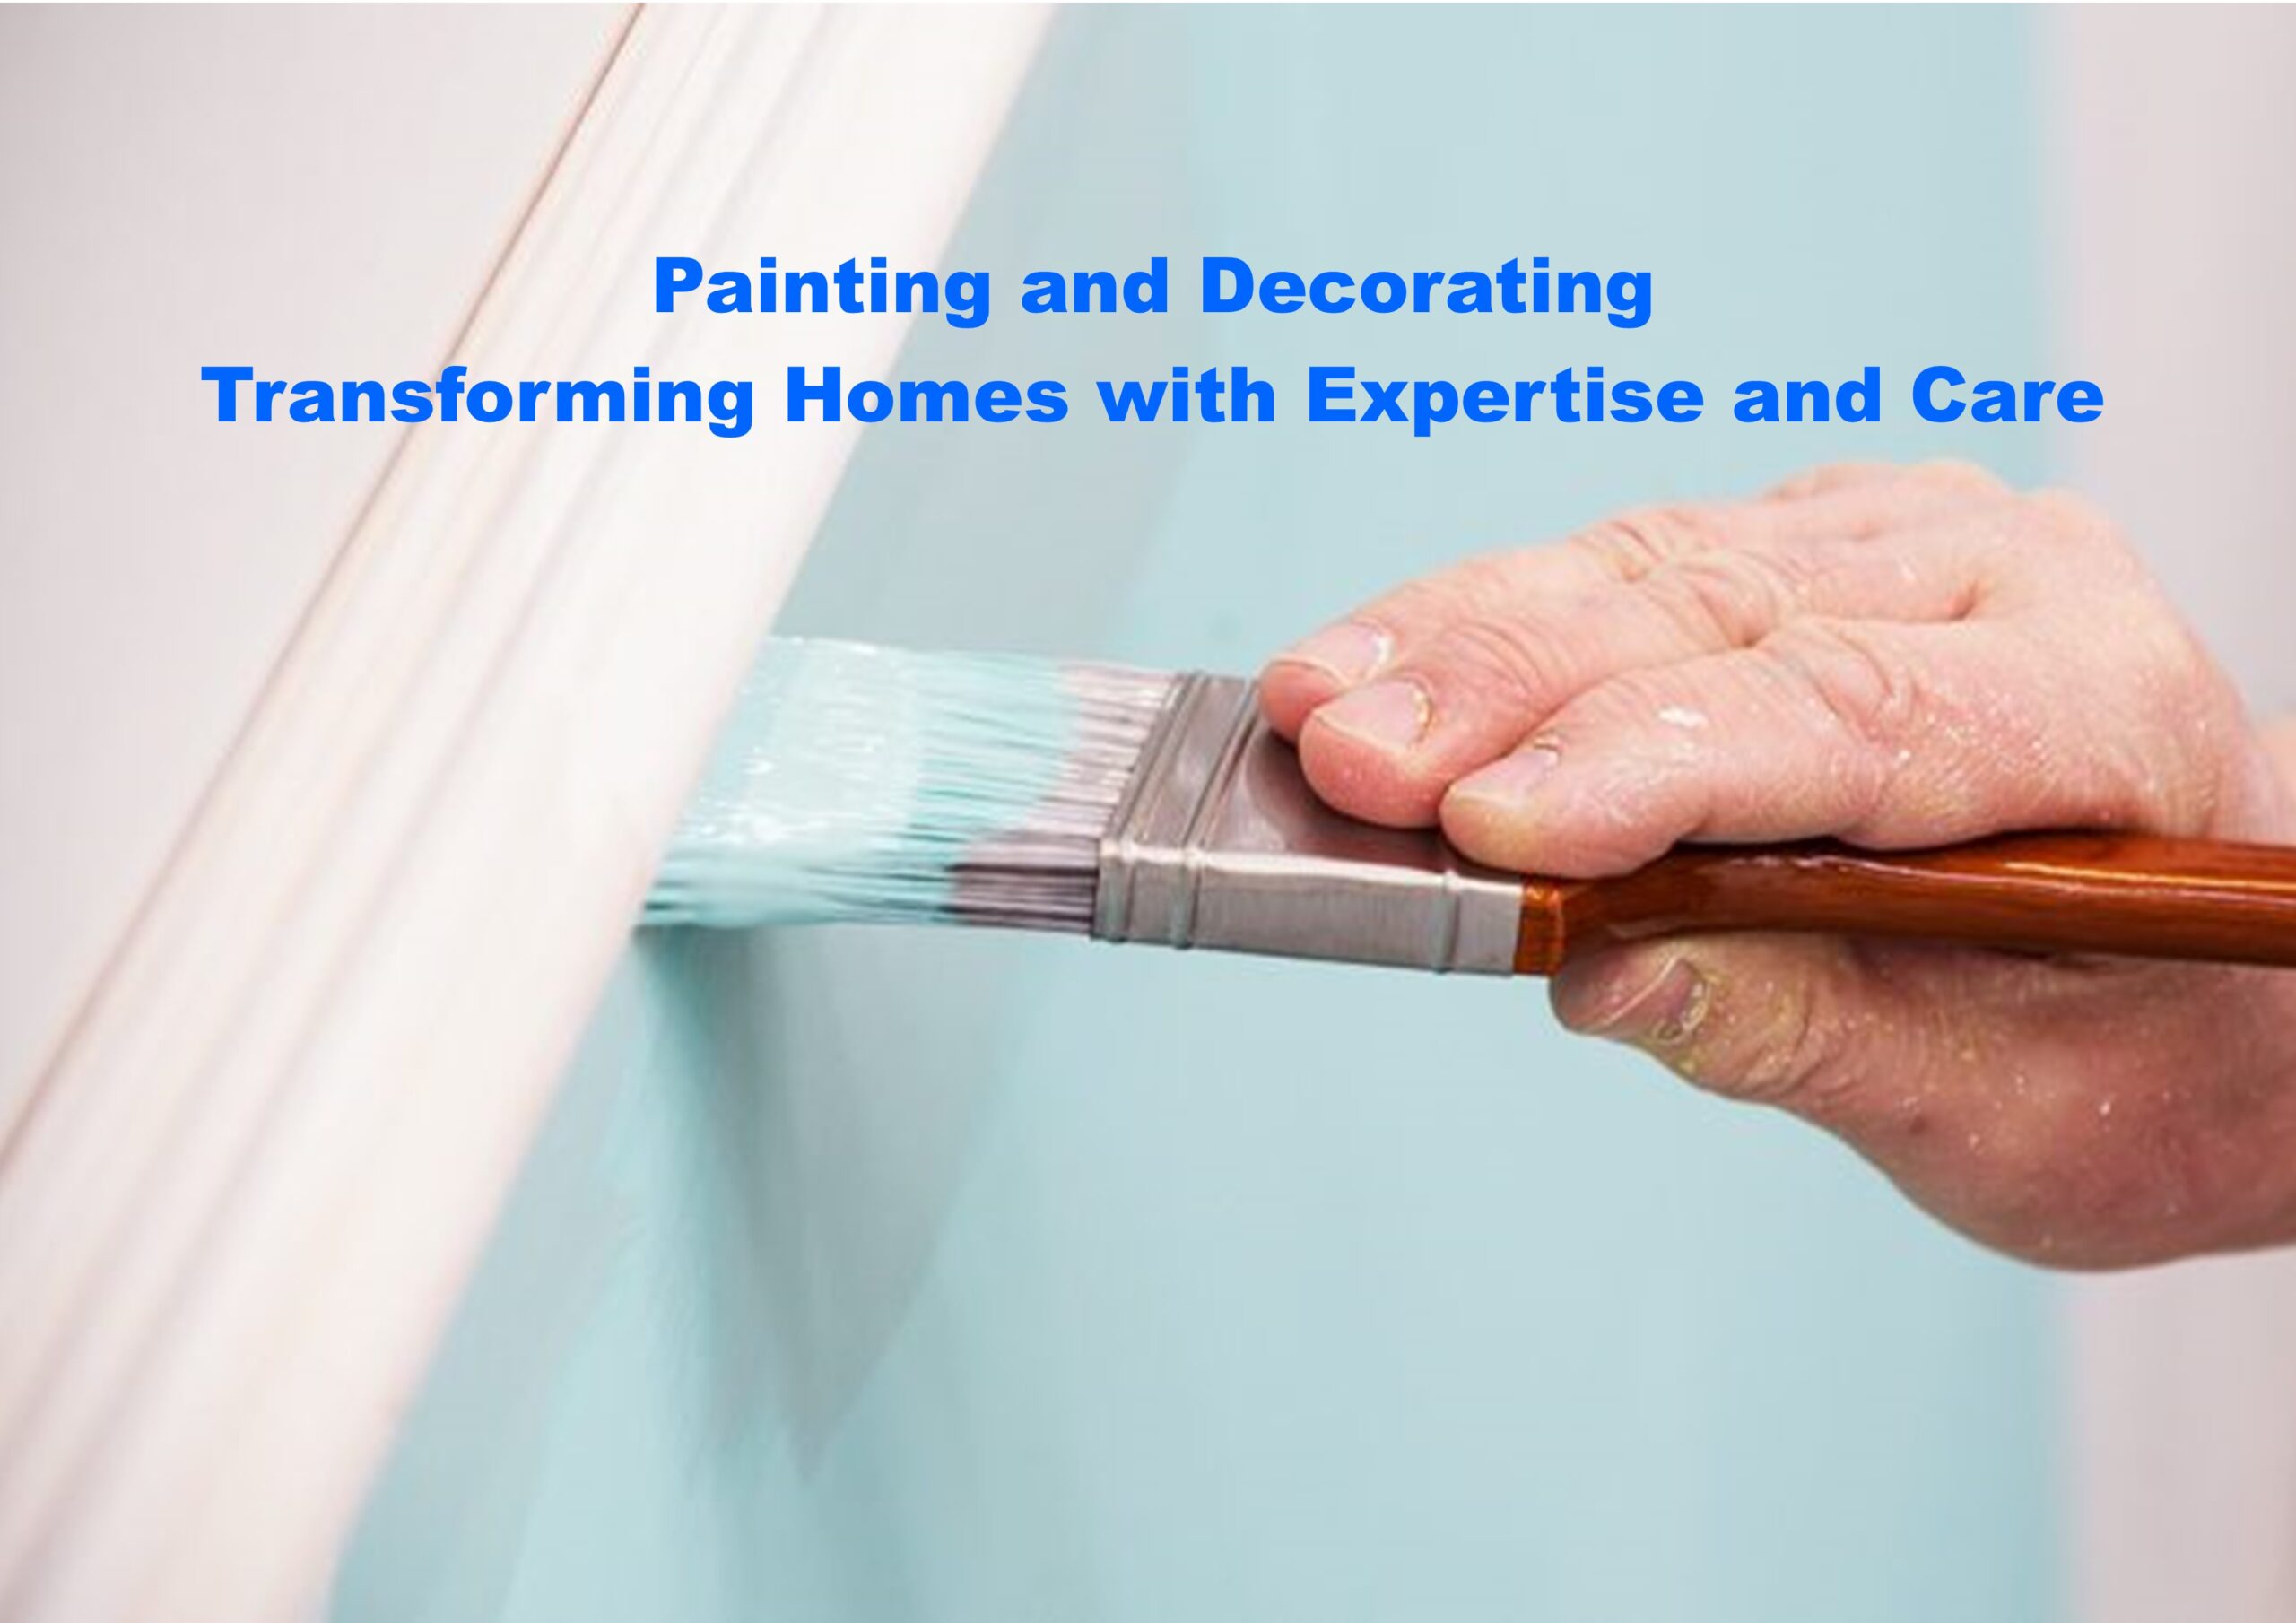 Painting and Decorating Transforming Homes with Expertise and Care